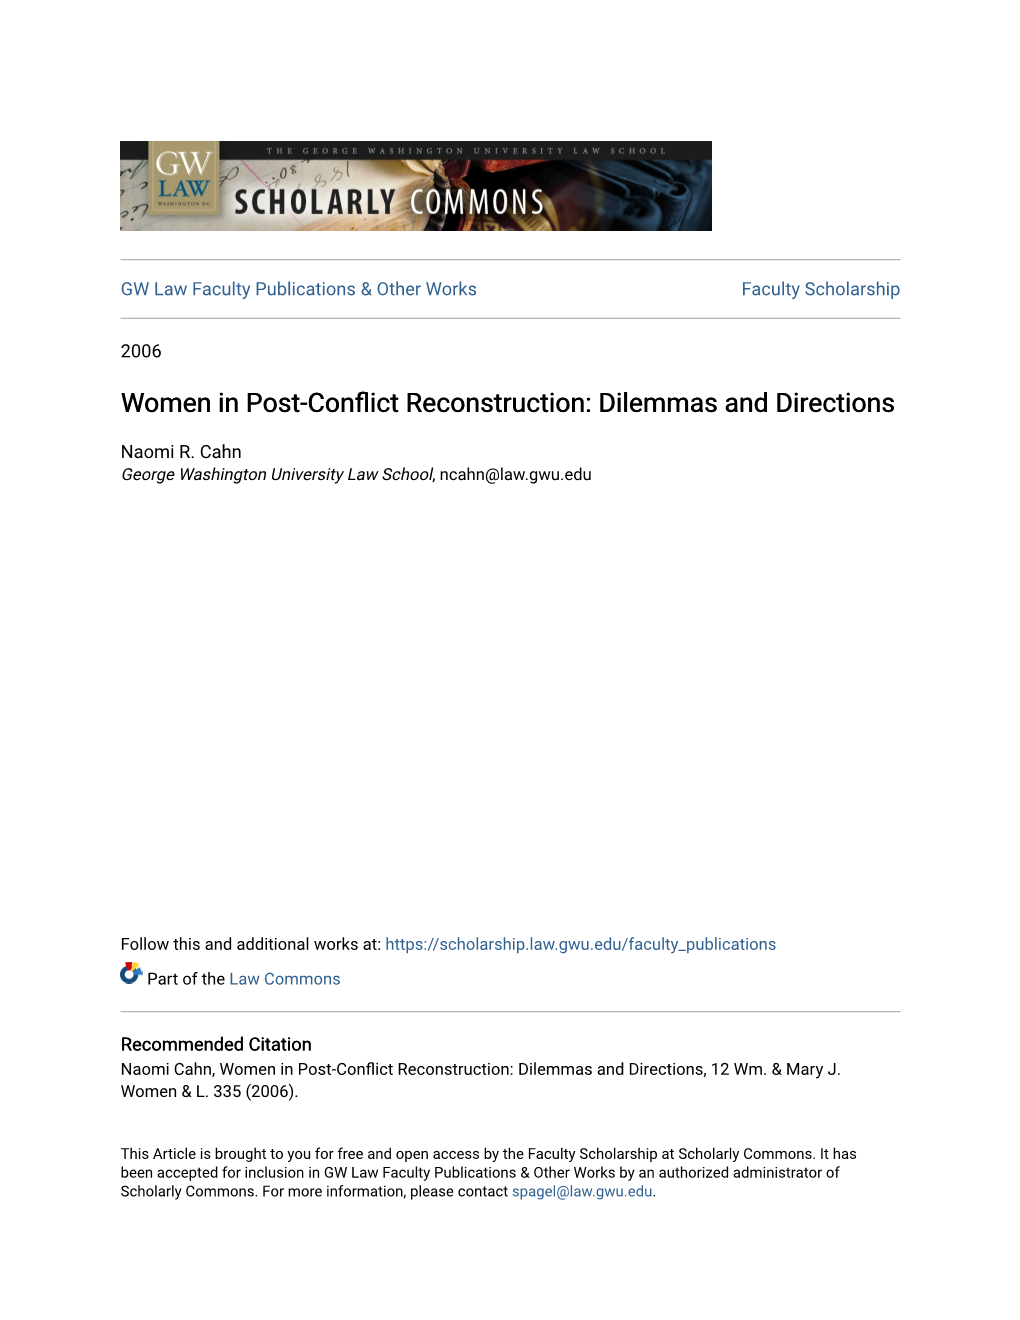 Women in Post-Conflict Reconstruction: Dilemmas and Directions